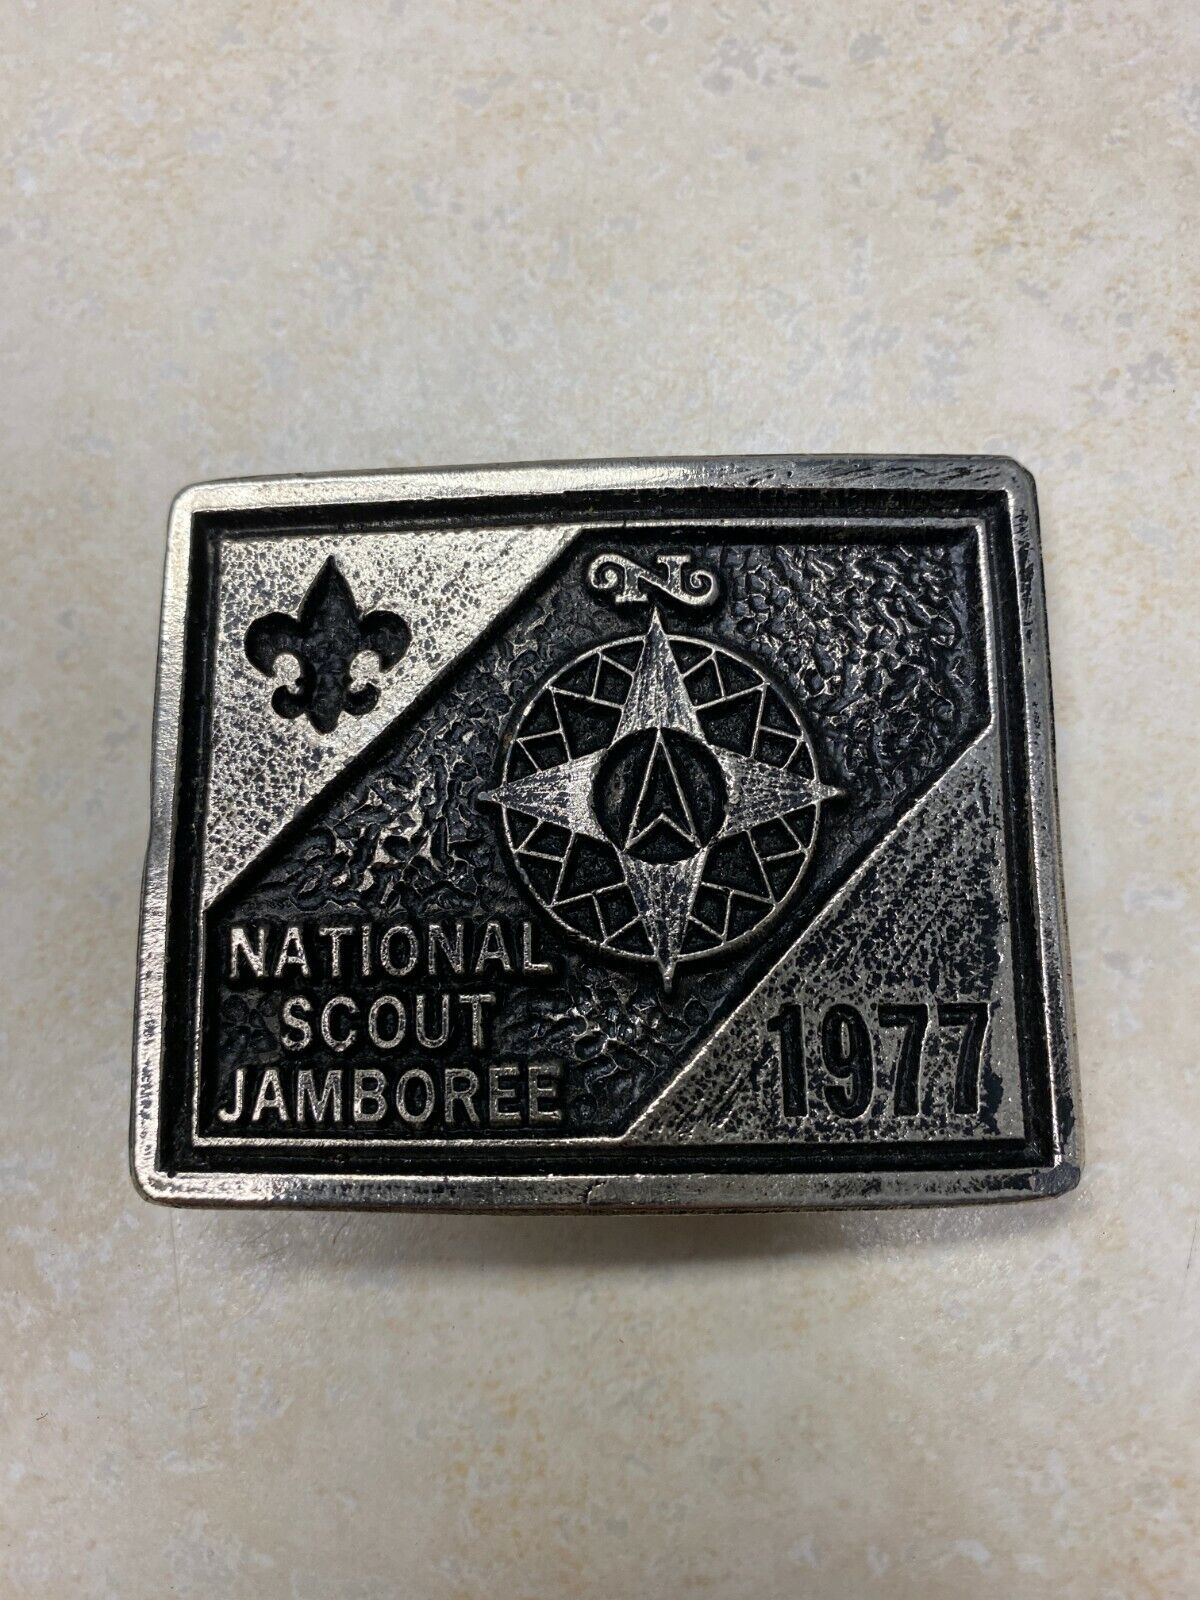 1977 National Jamboree Belt Buckle by Dale Annis